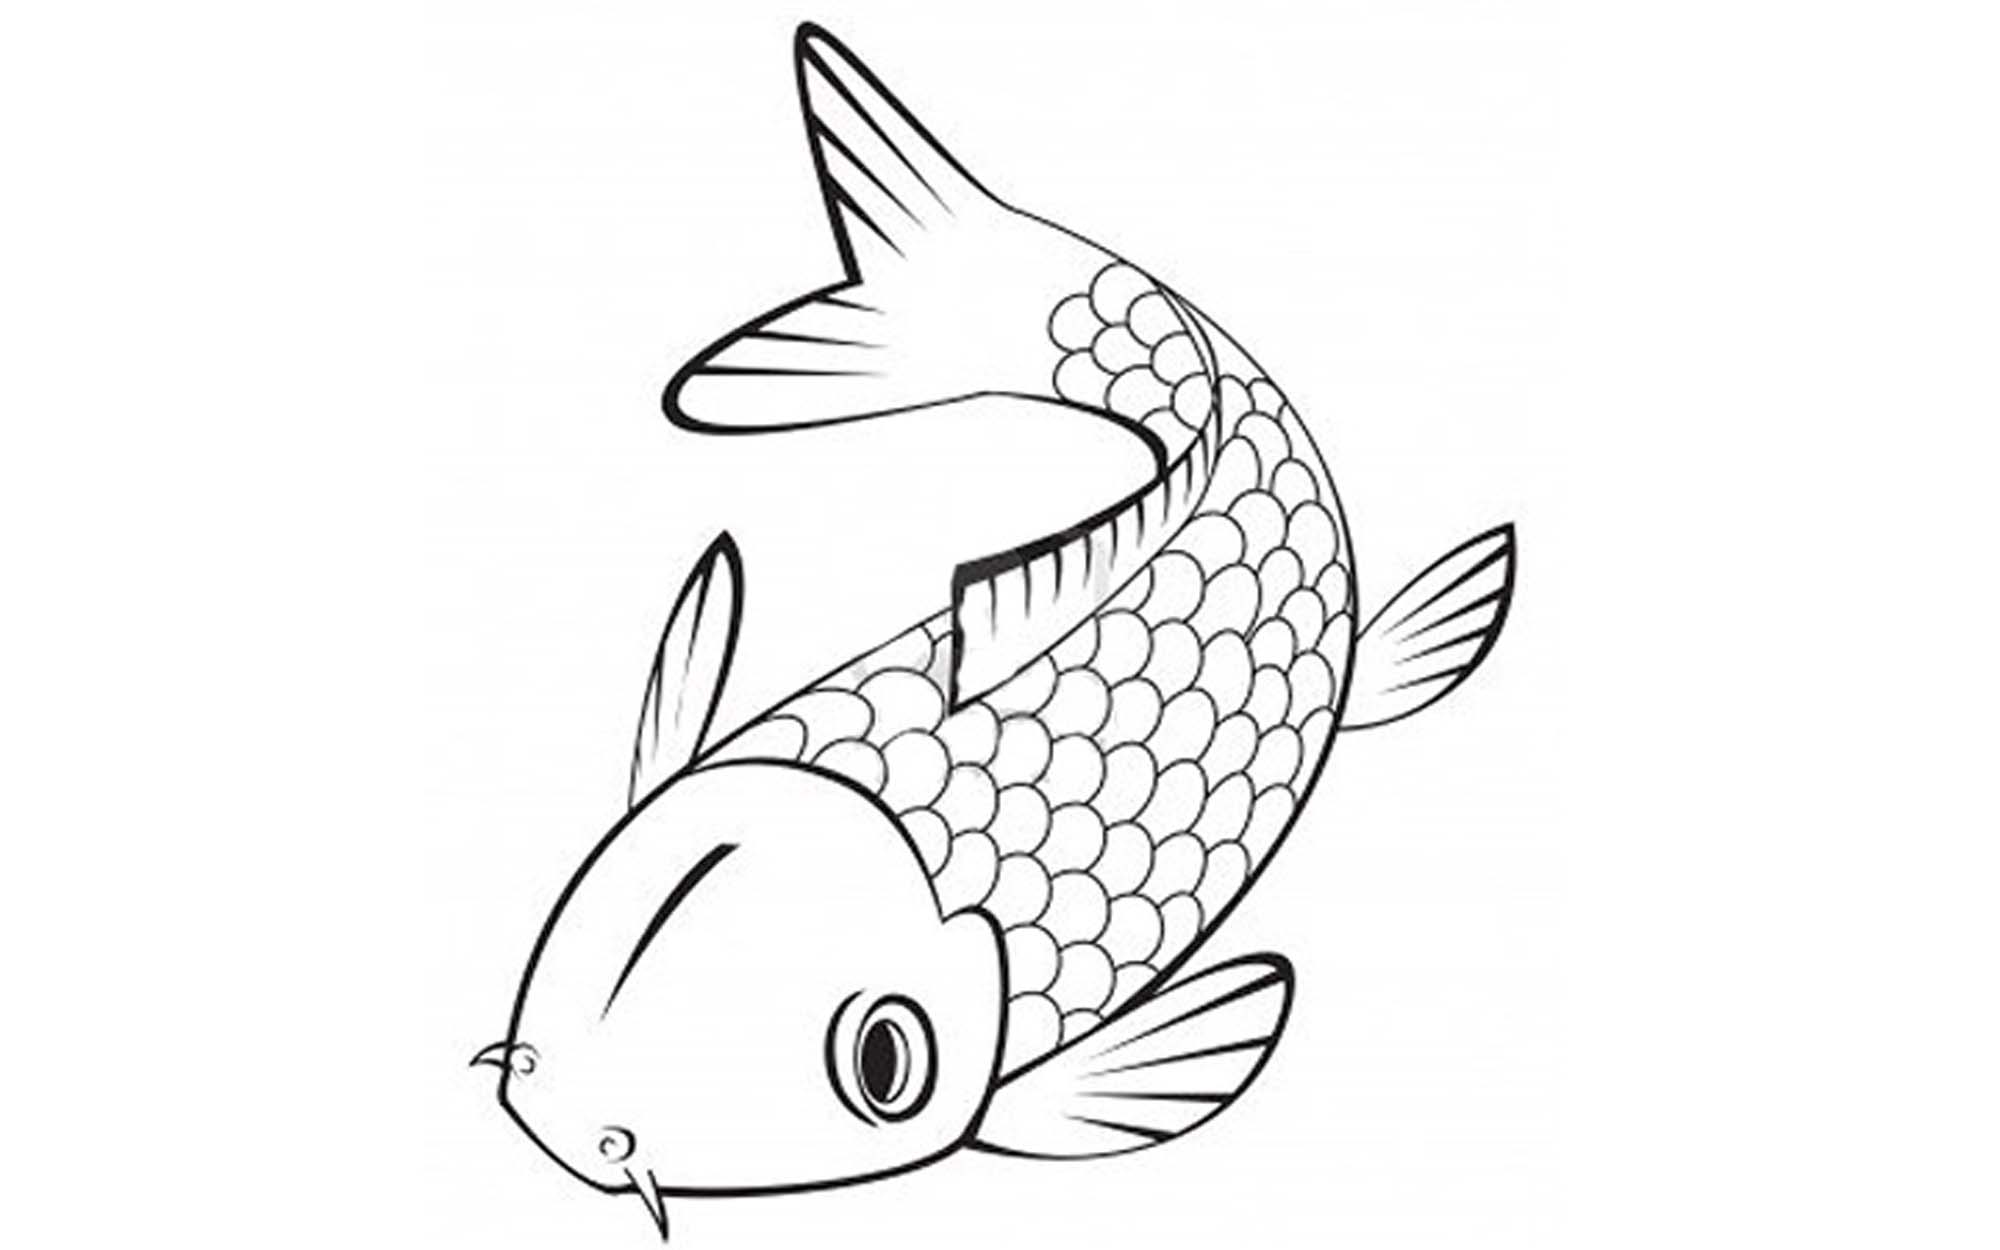 fish-coloring-pages-to-print | | BestAppsForKids.com